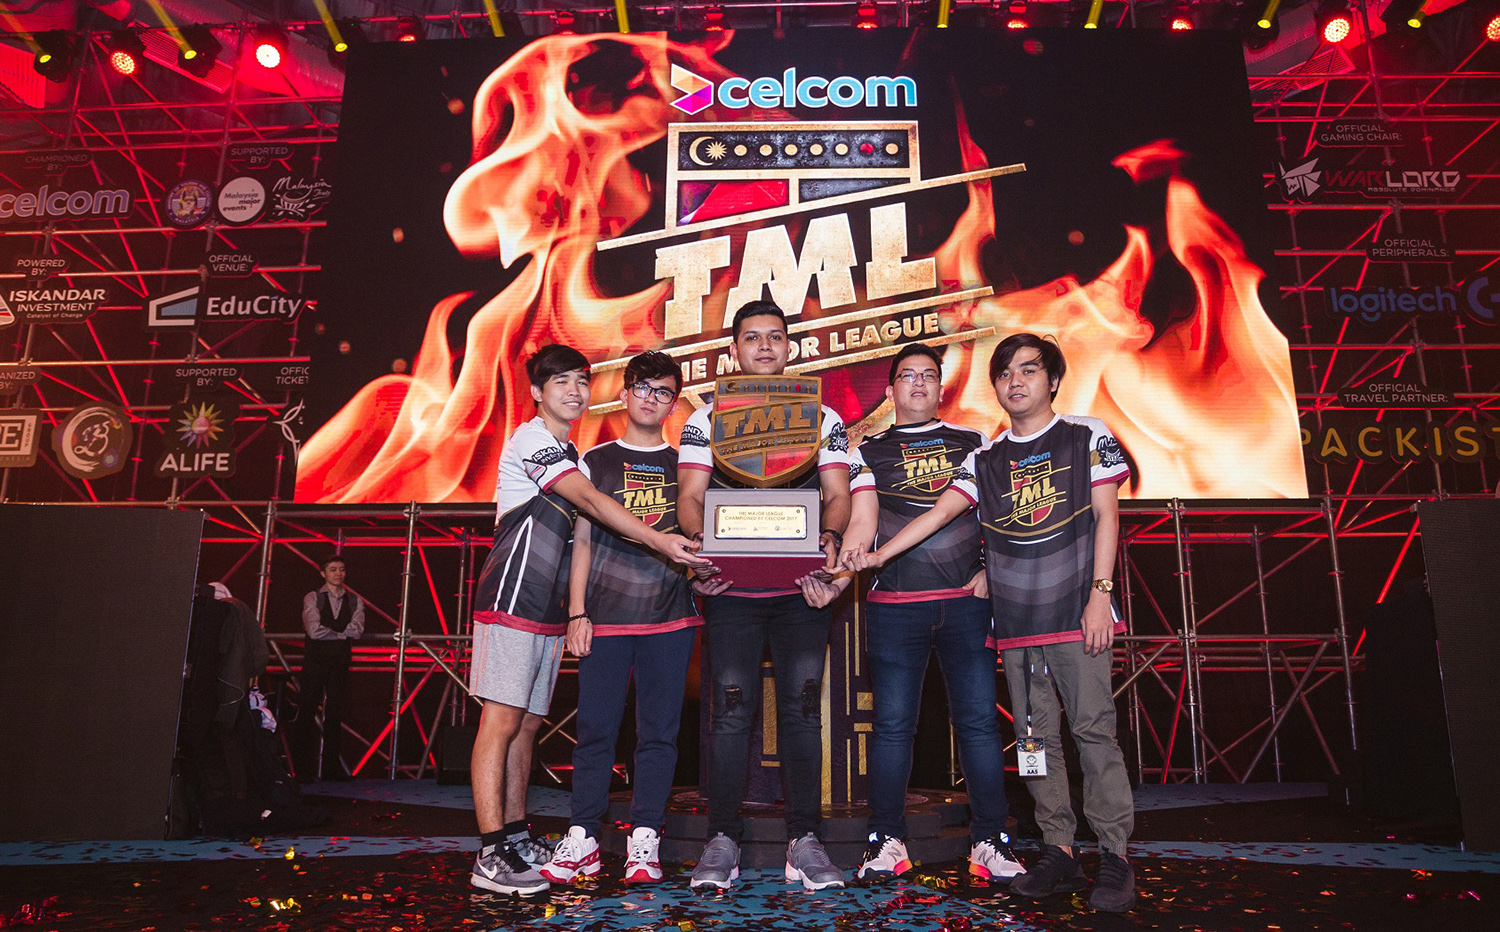 Execration is winner of The Major League championed by Celcom 